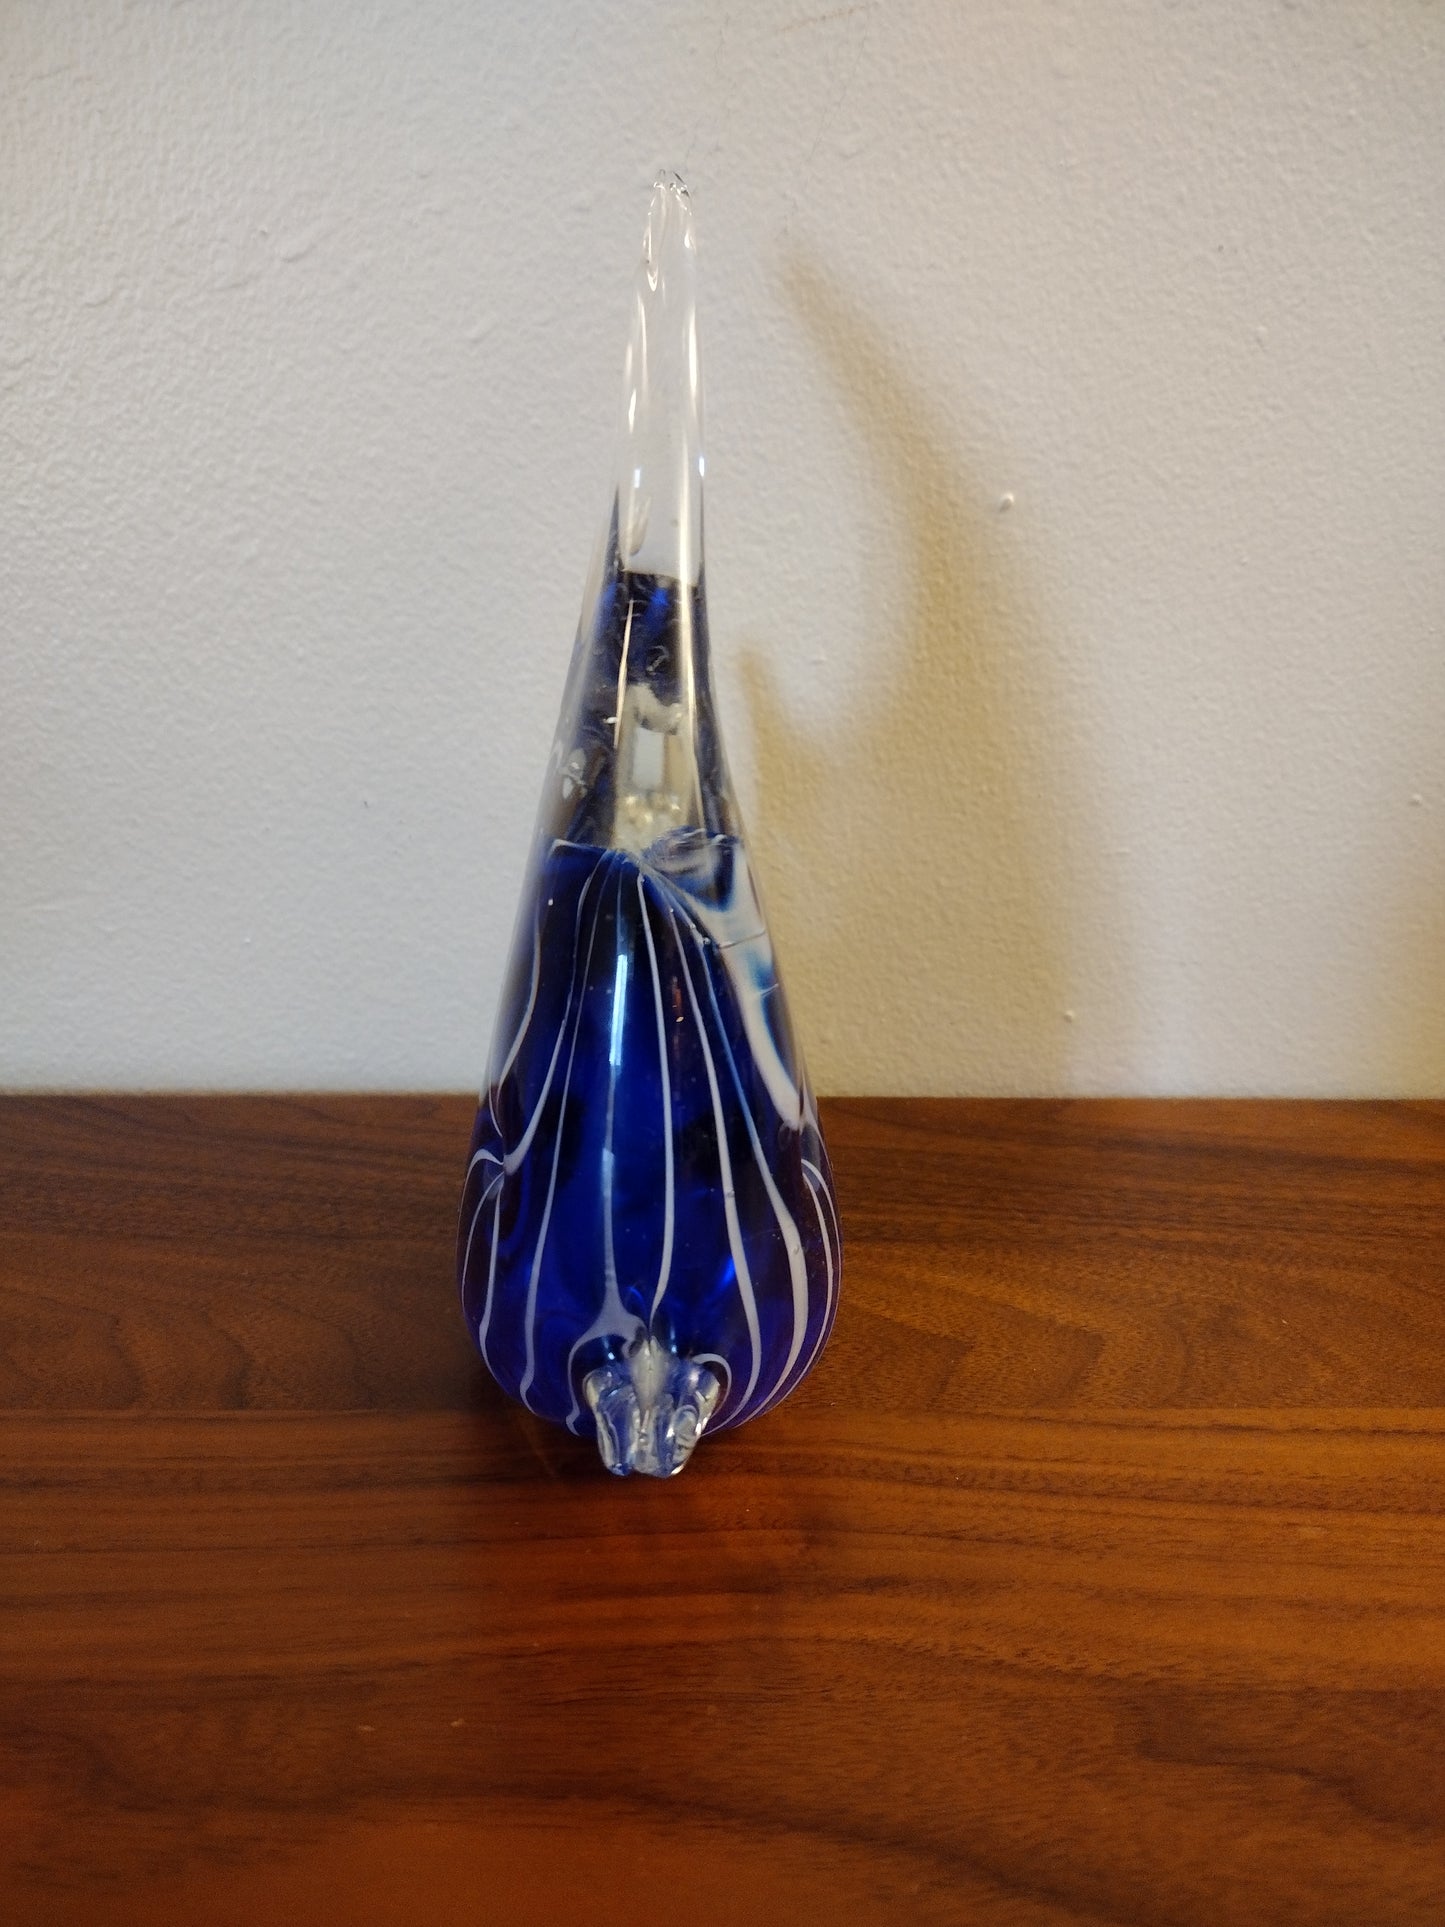 Blue With White Stripes Glass Angel Fish Paper Weight Figurine 4" Tall - Vintage